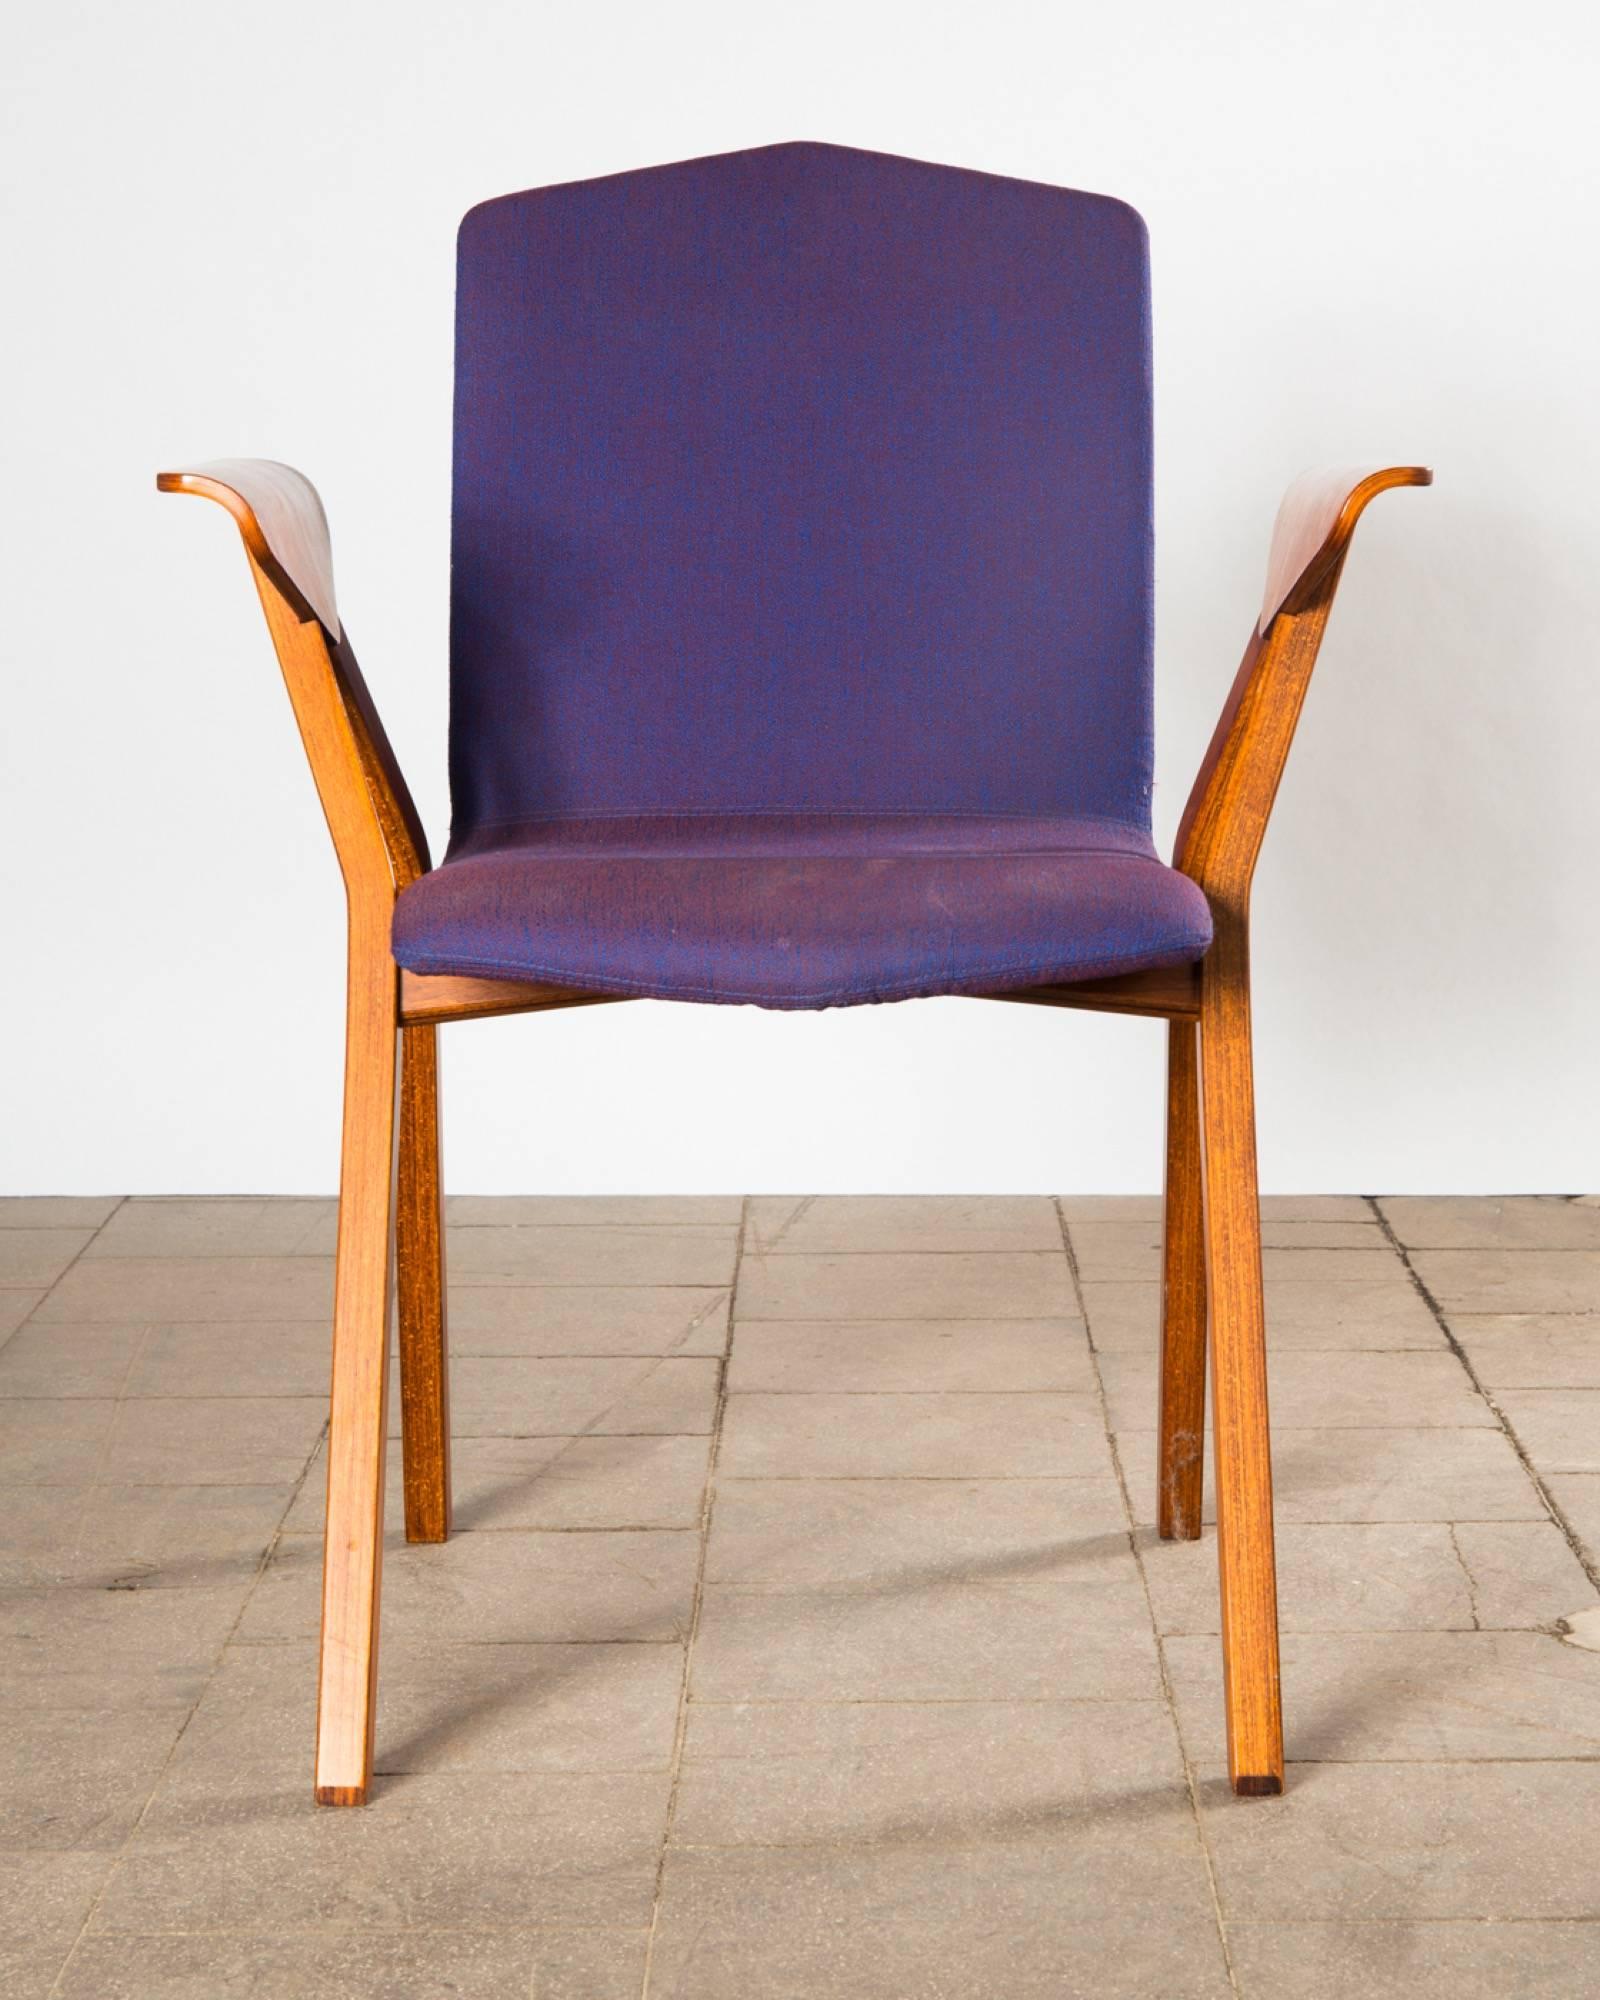 Armchair by the Norwegian manufacturer Hag. Manufacturer's label on the underside of chair.